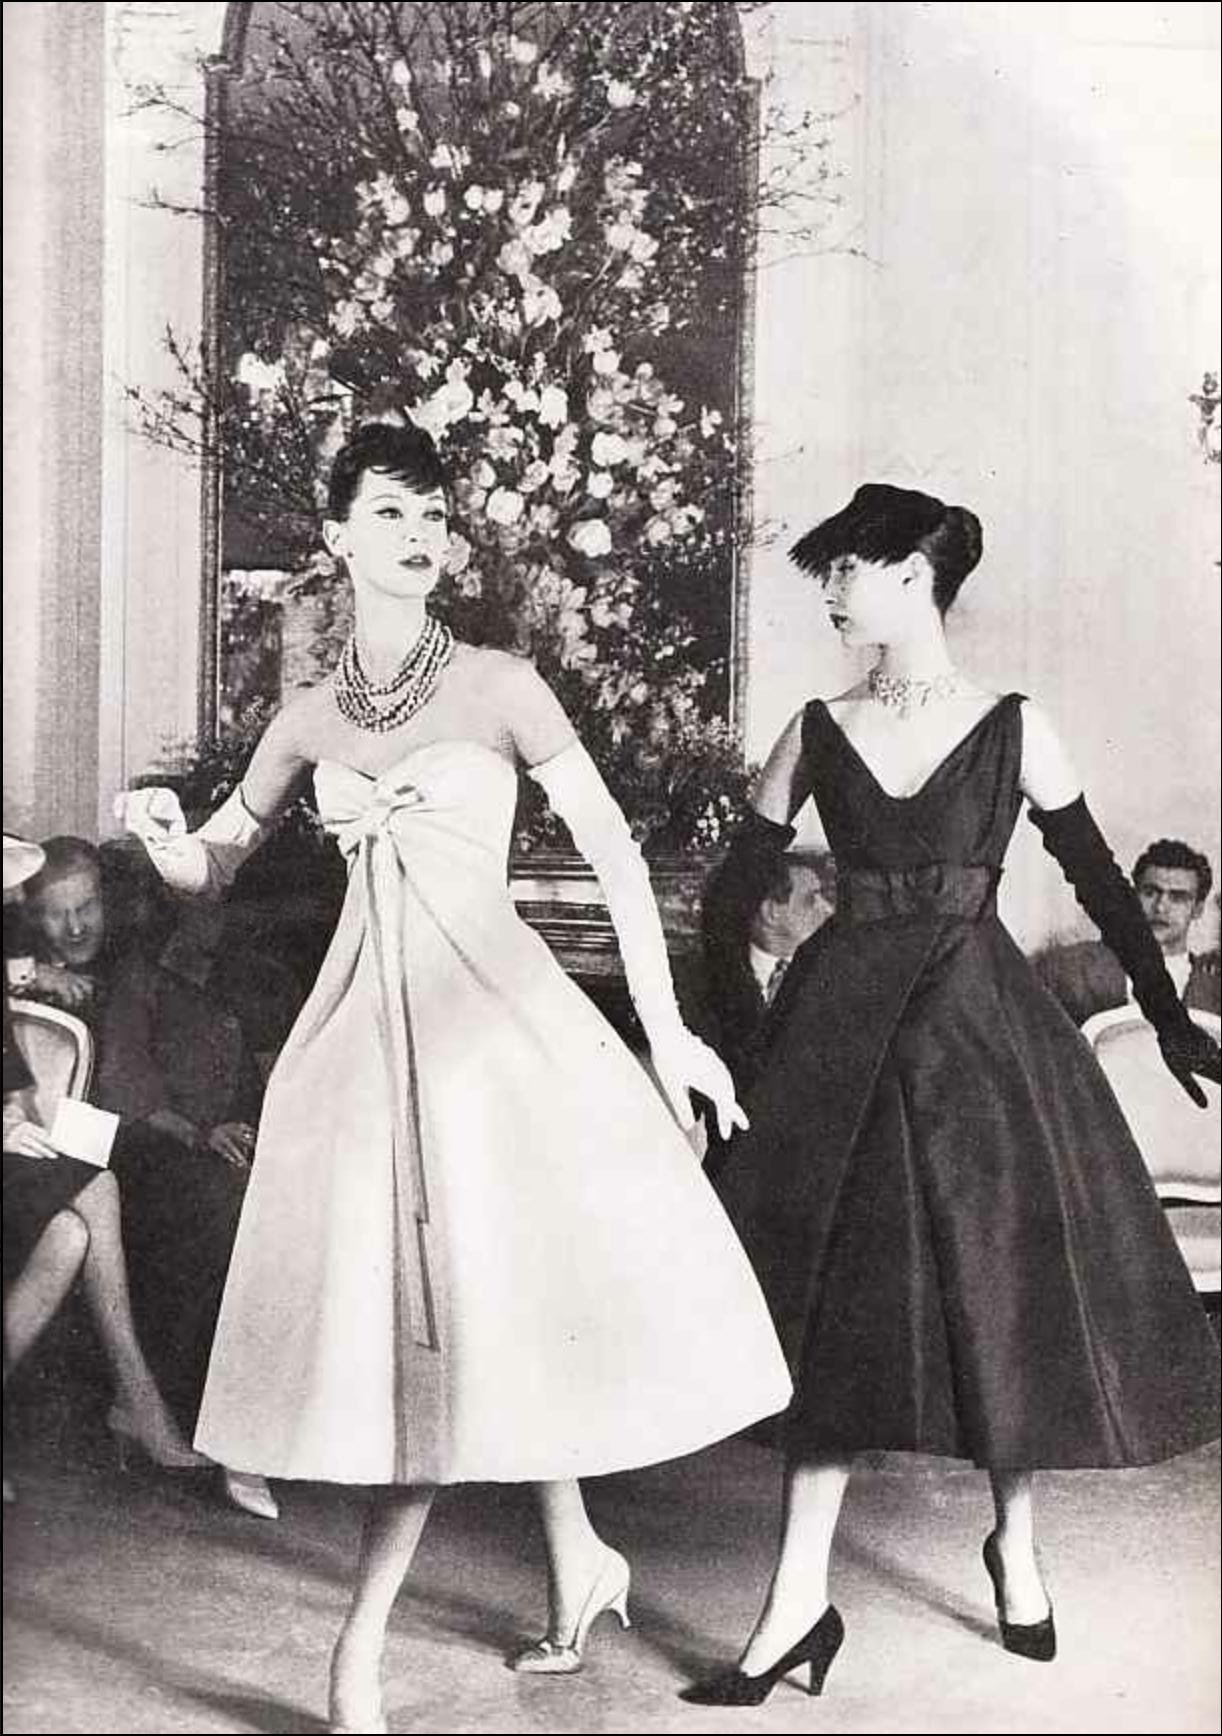 A highly coveted and truly breathtaking museum-quality Christian Dior haute couture 'Chez' titled new look dress dating back to his spring-summer 1956 collection. While the House of Dior is still a thriving business today, Dior's untimely death in